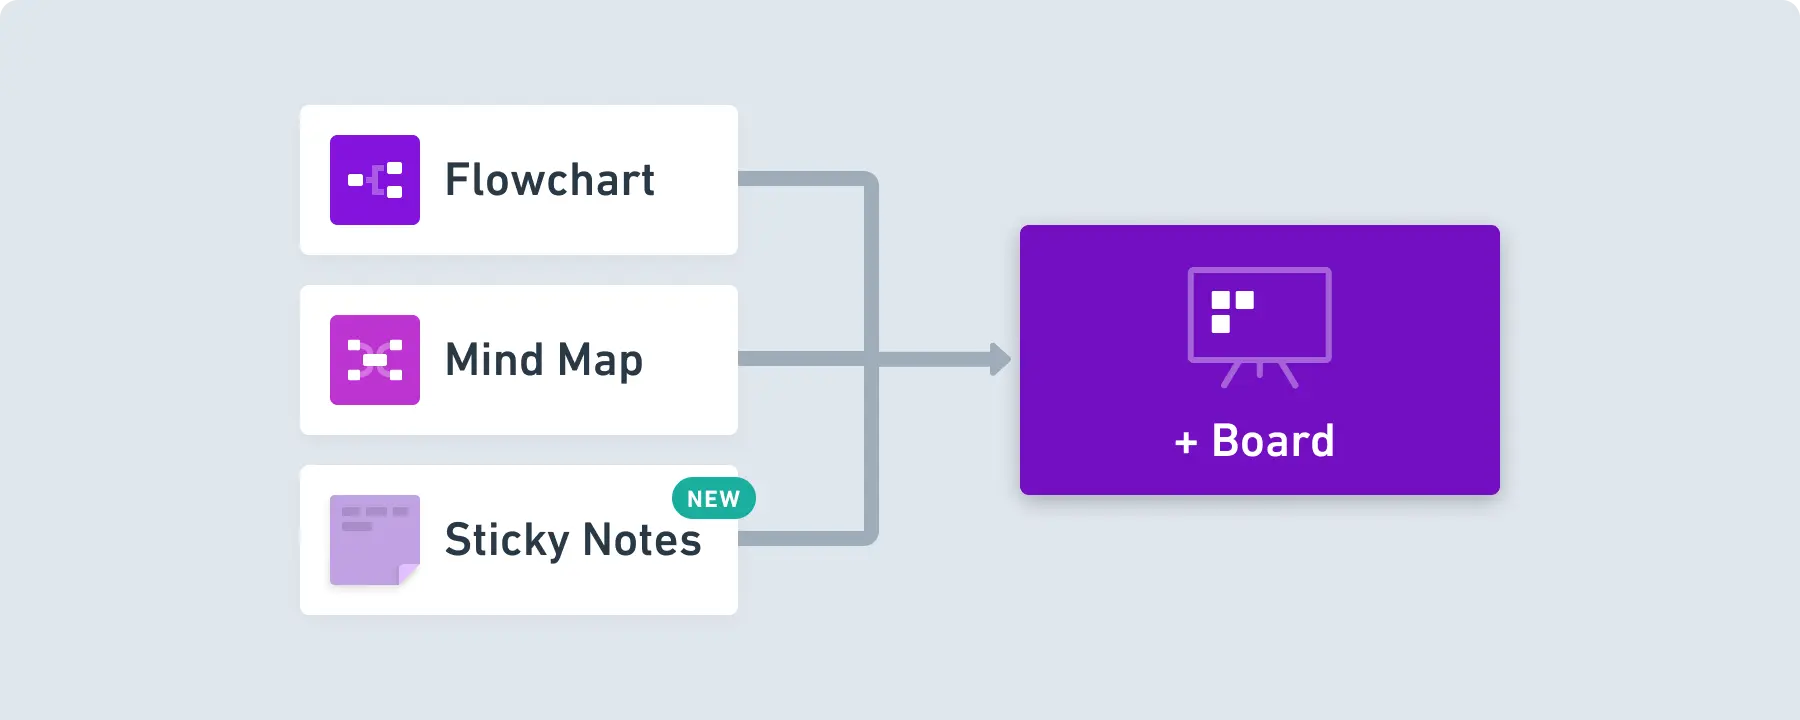 Flowcharts, Mind maps, and Sticky Notes have been merged into a single Board type.